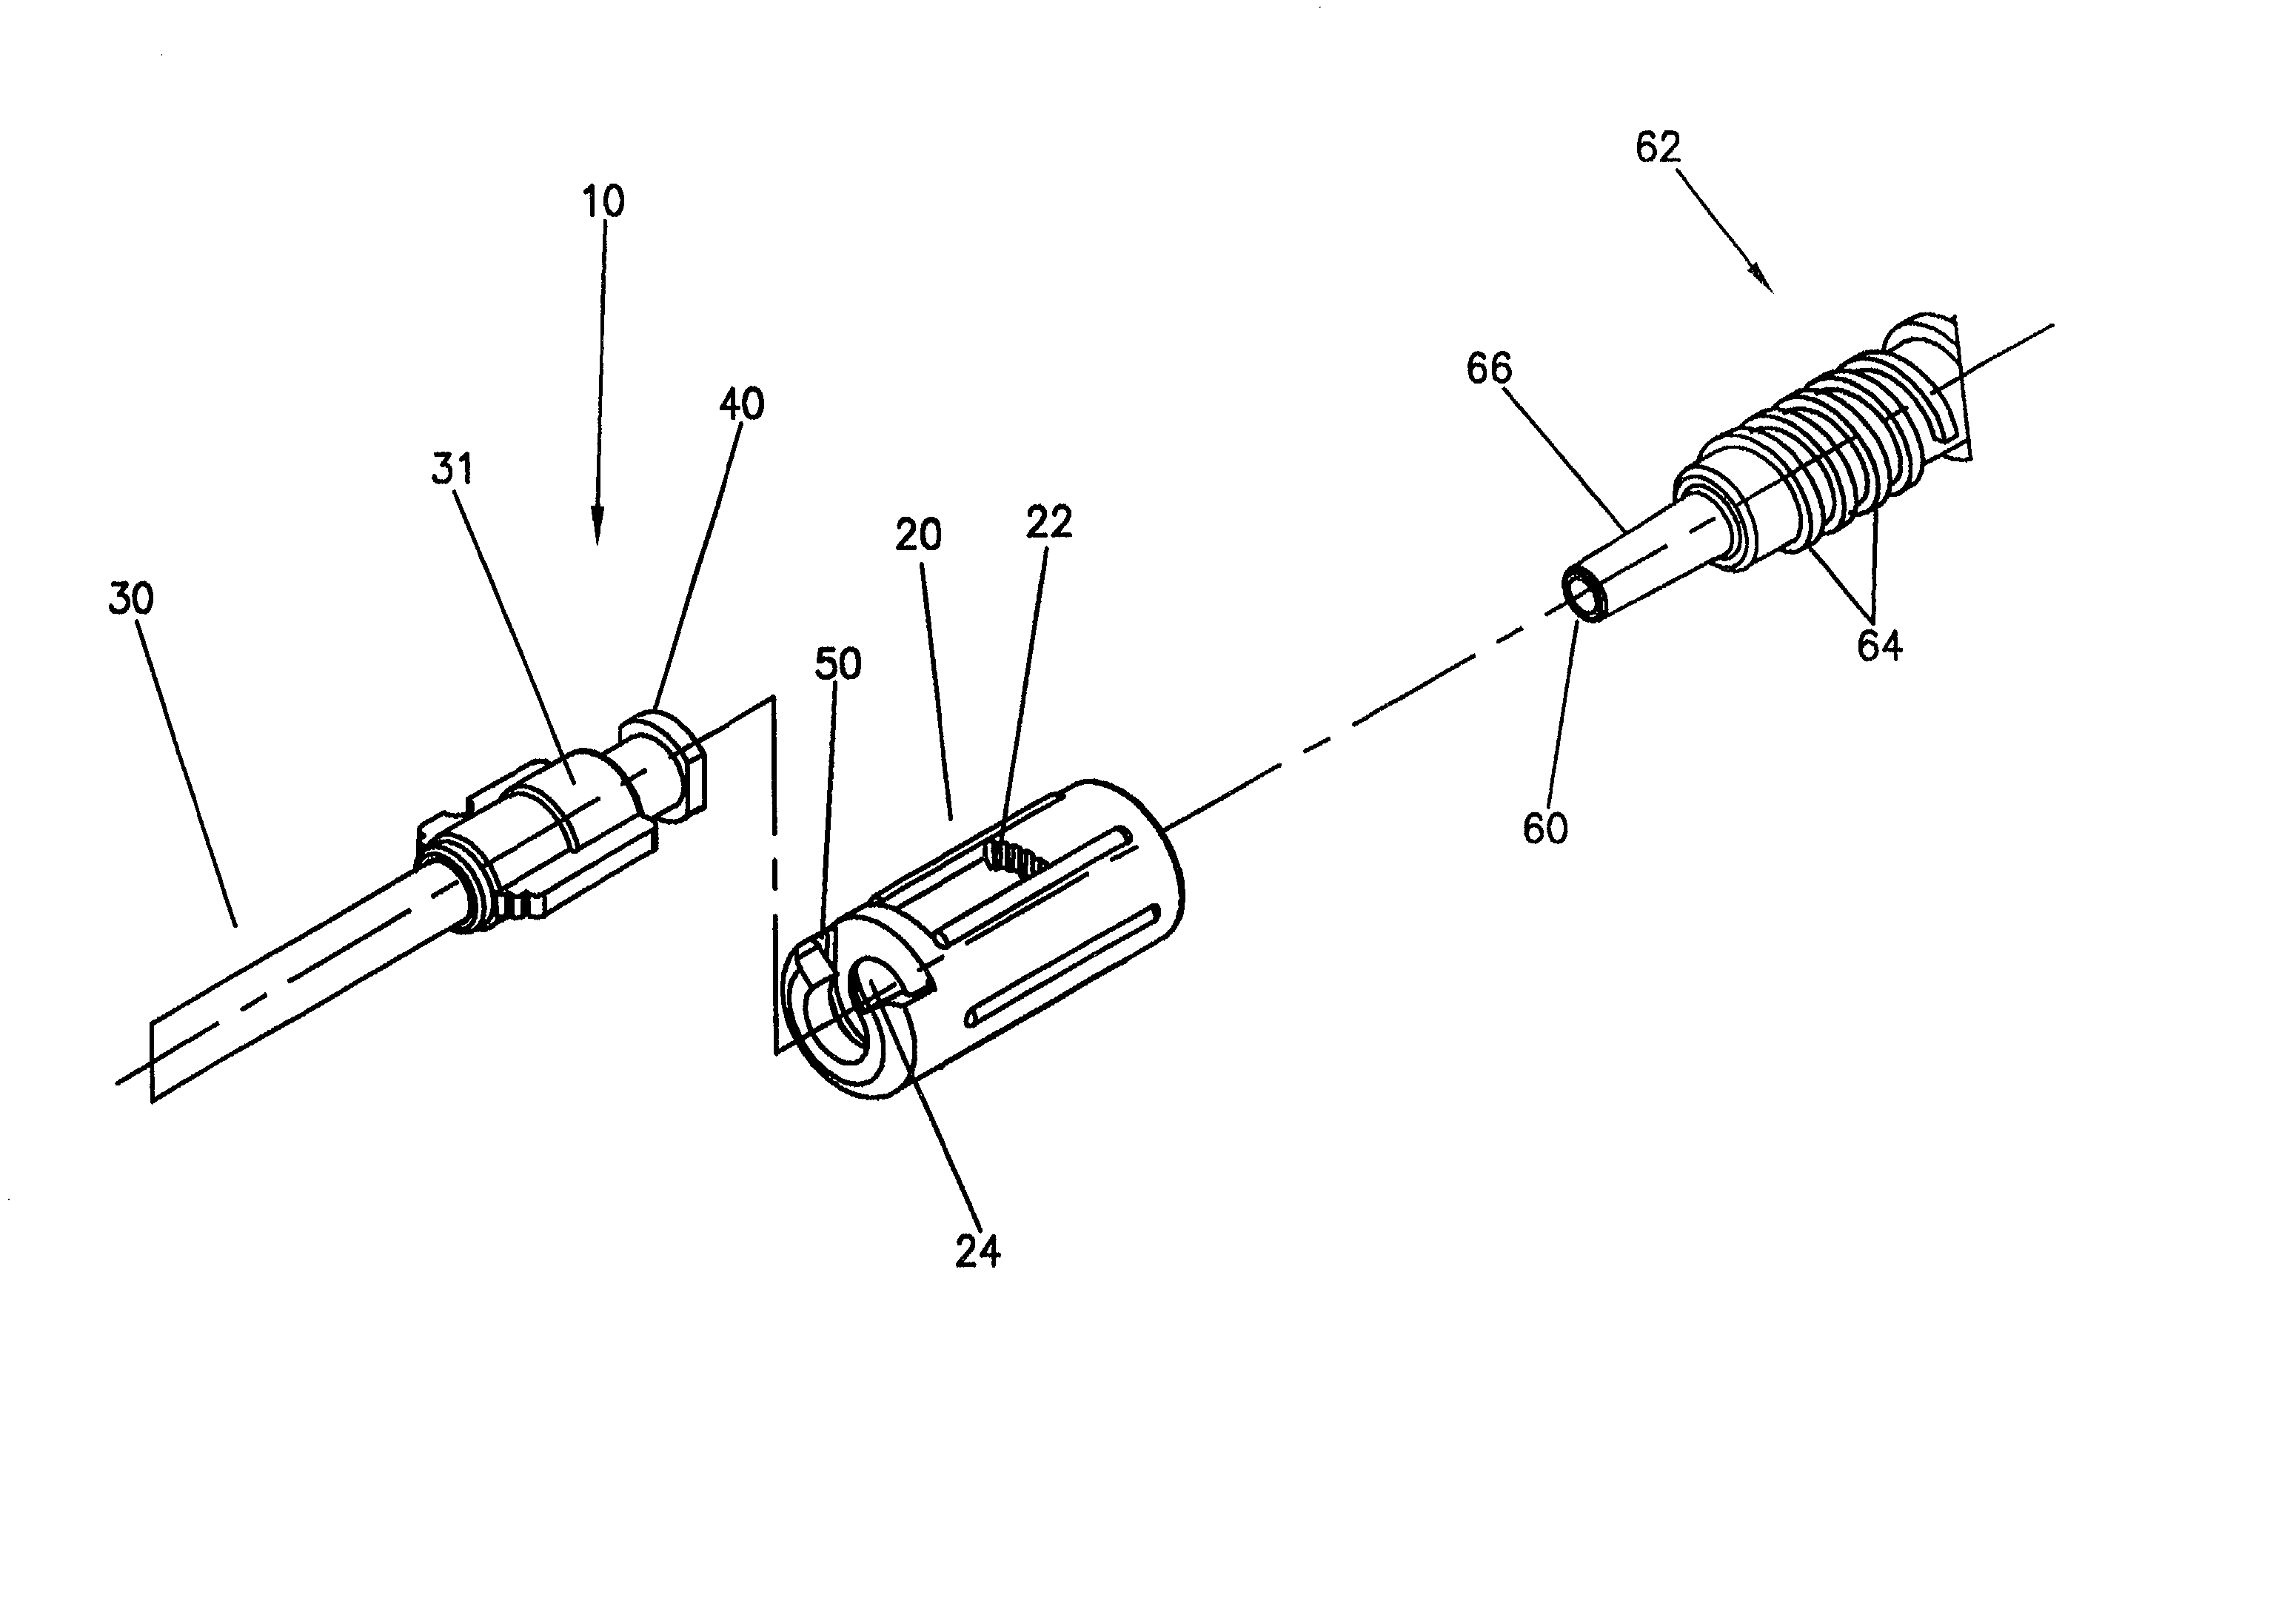 Connector and tubing assembly for use with a syringe